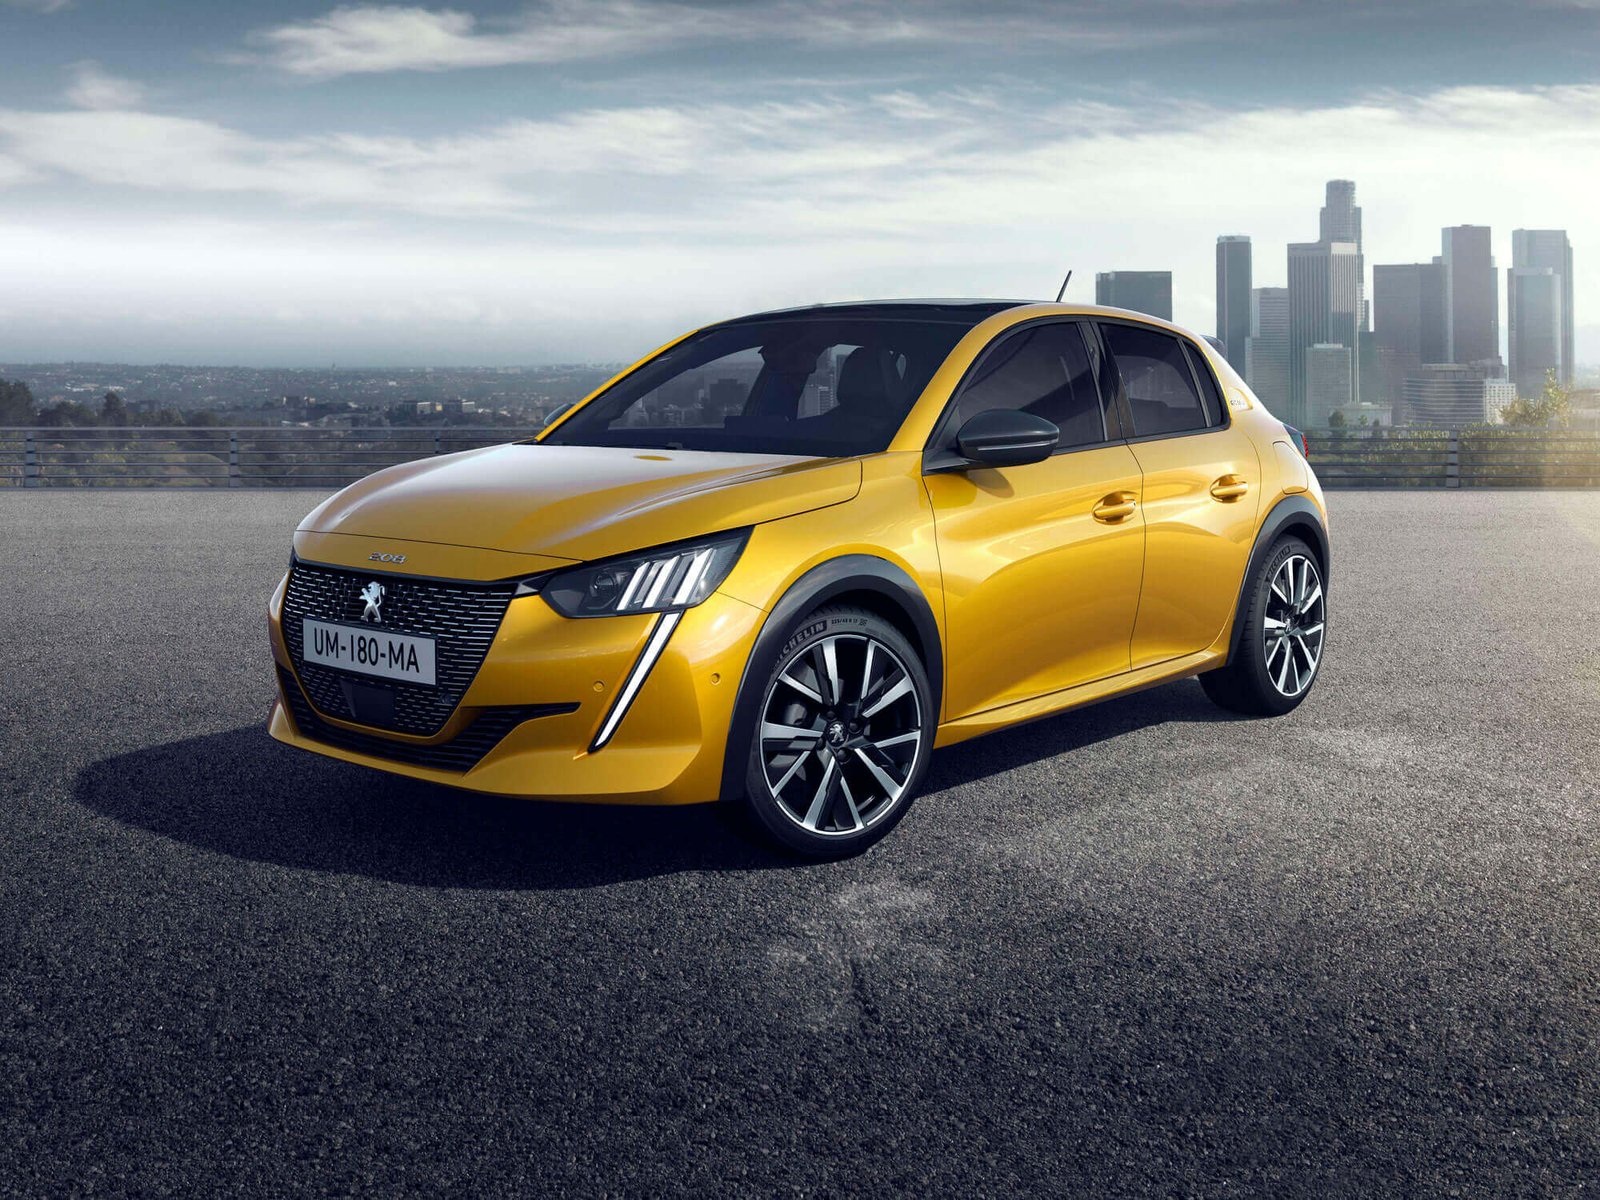 New 2020 Peugeot 208 prices confirmed